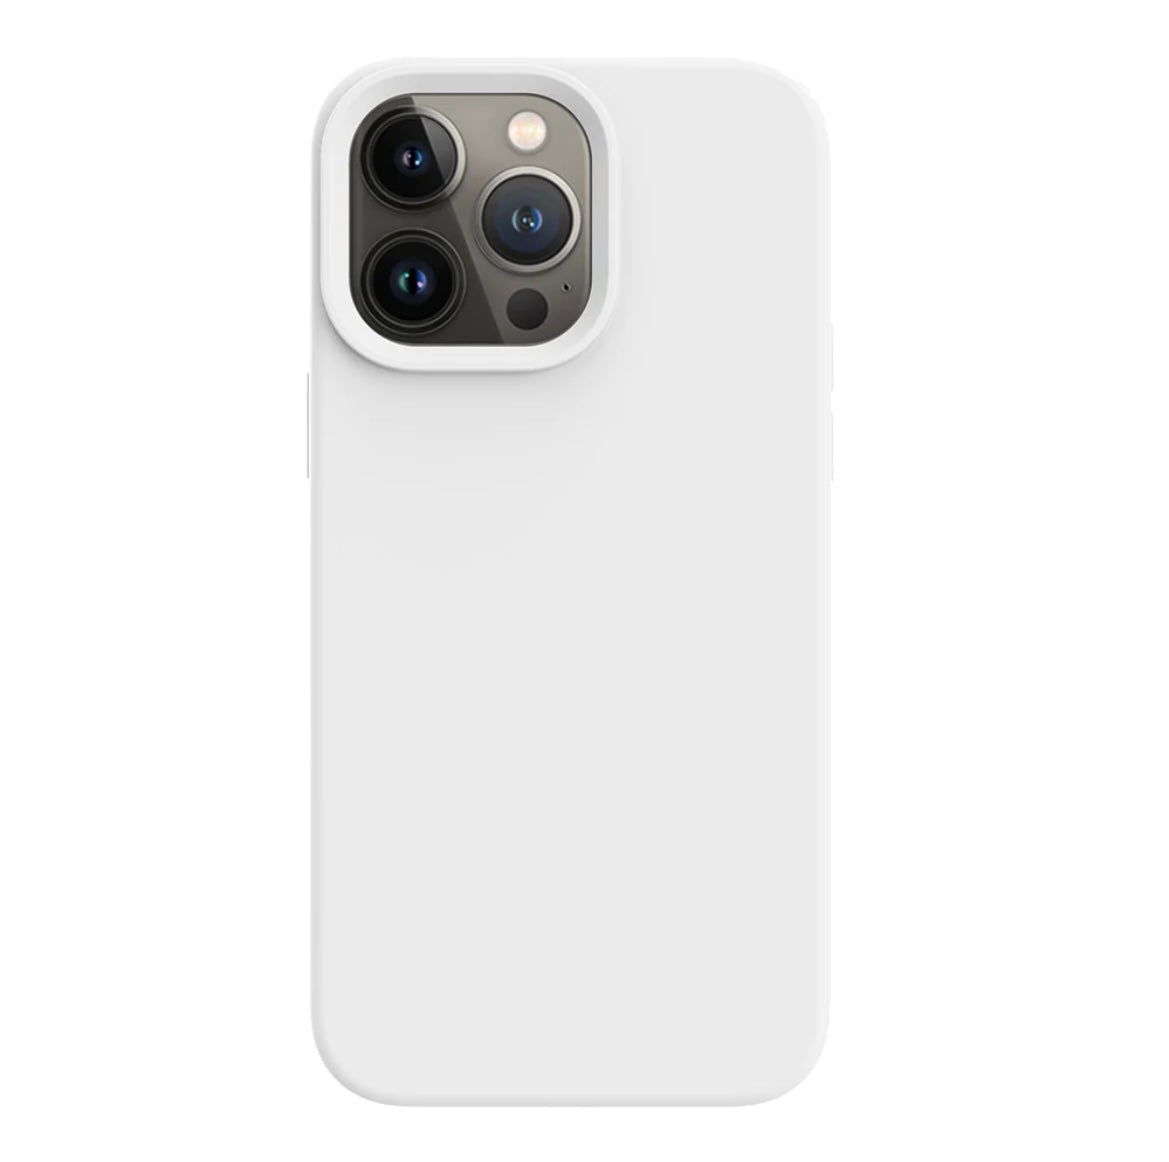 Cases For iPhone 12 Pro Max saynama